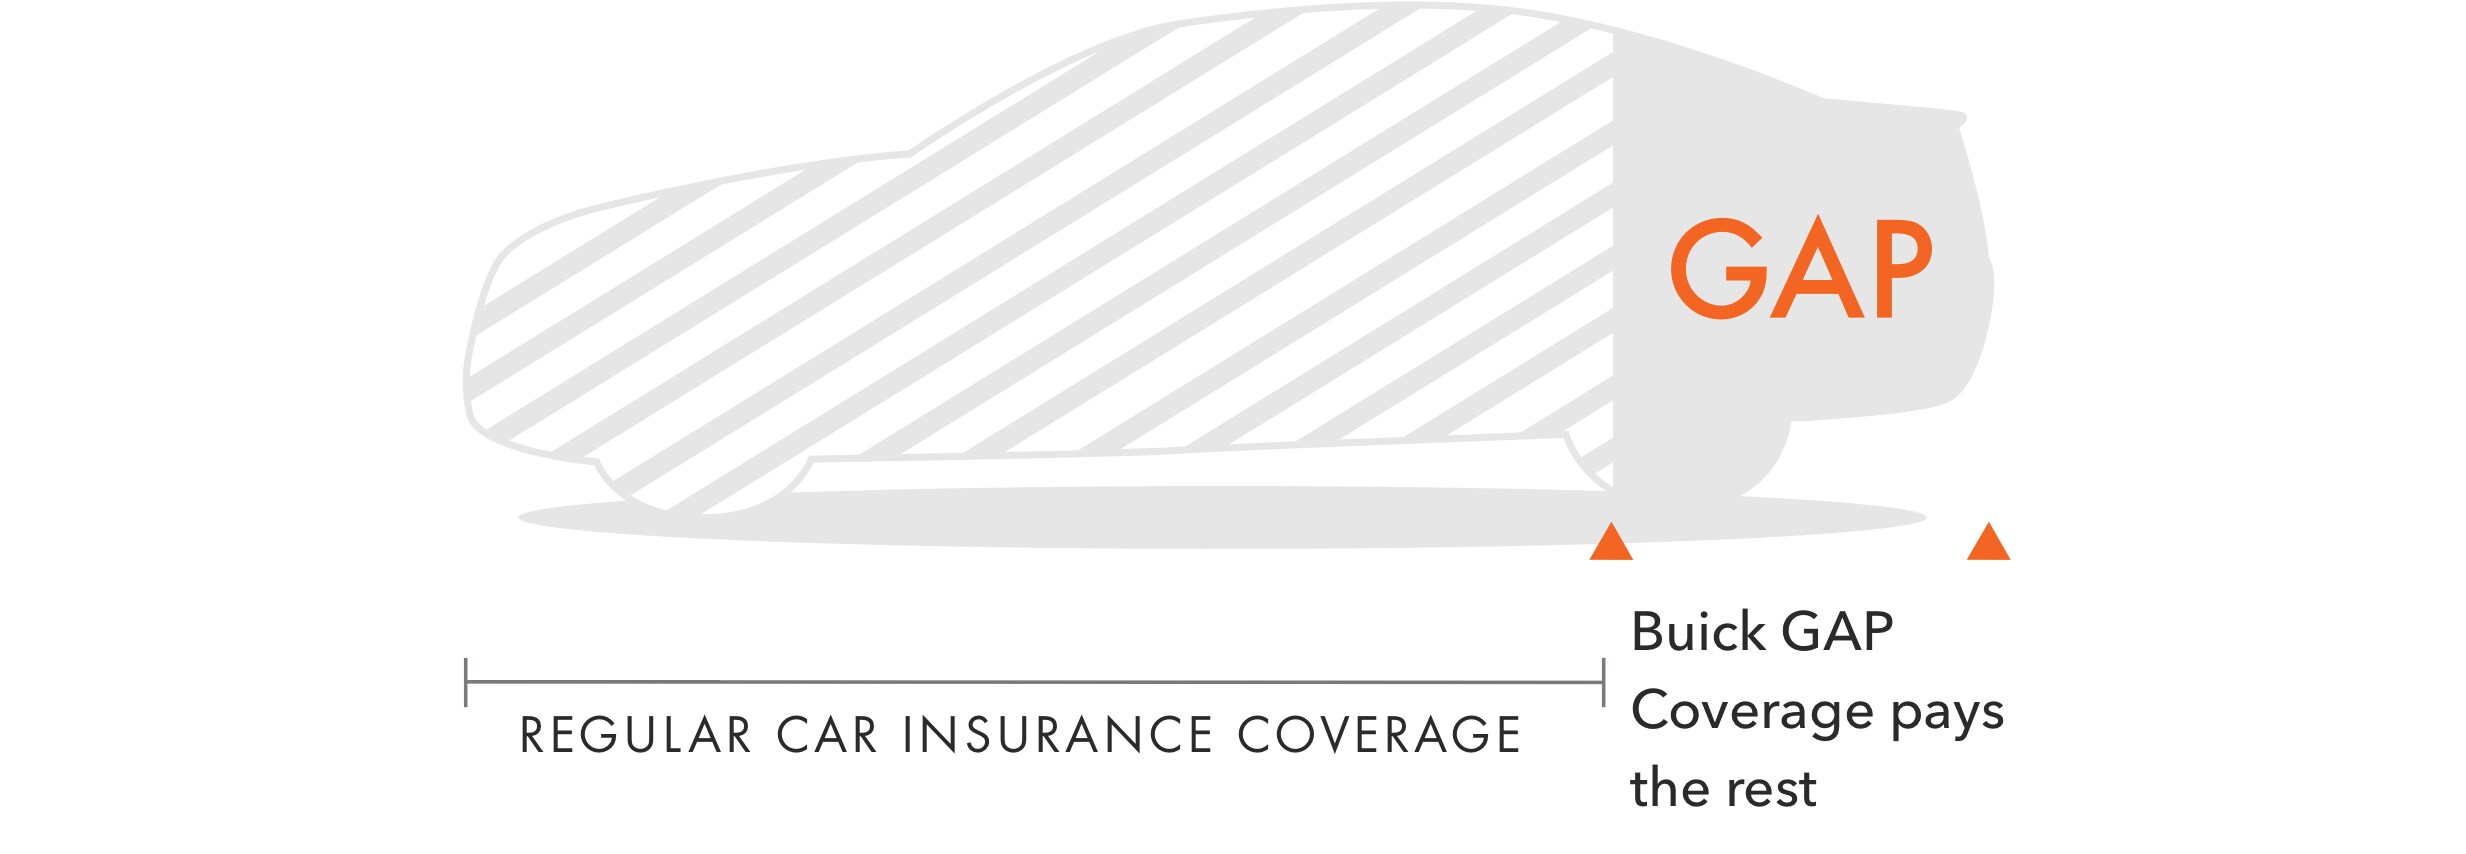 Buick Guaranteed Asset Protection (GAP) Coverage Infographic